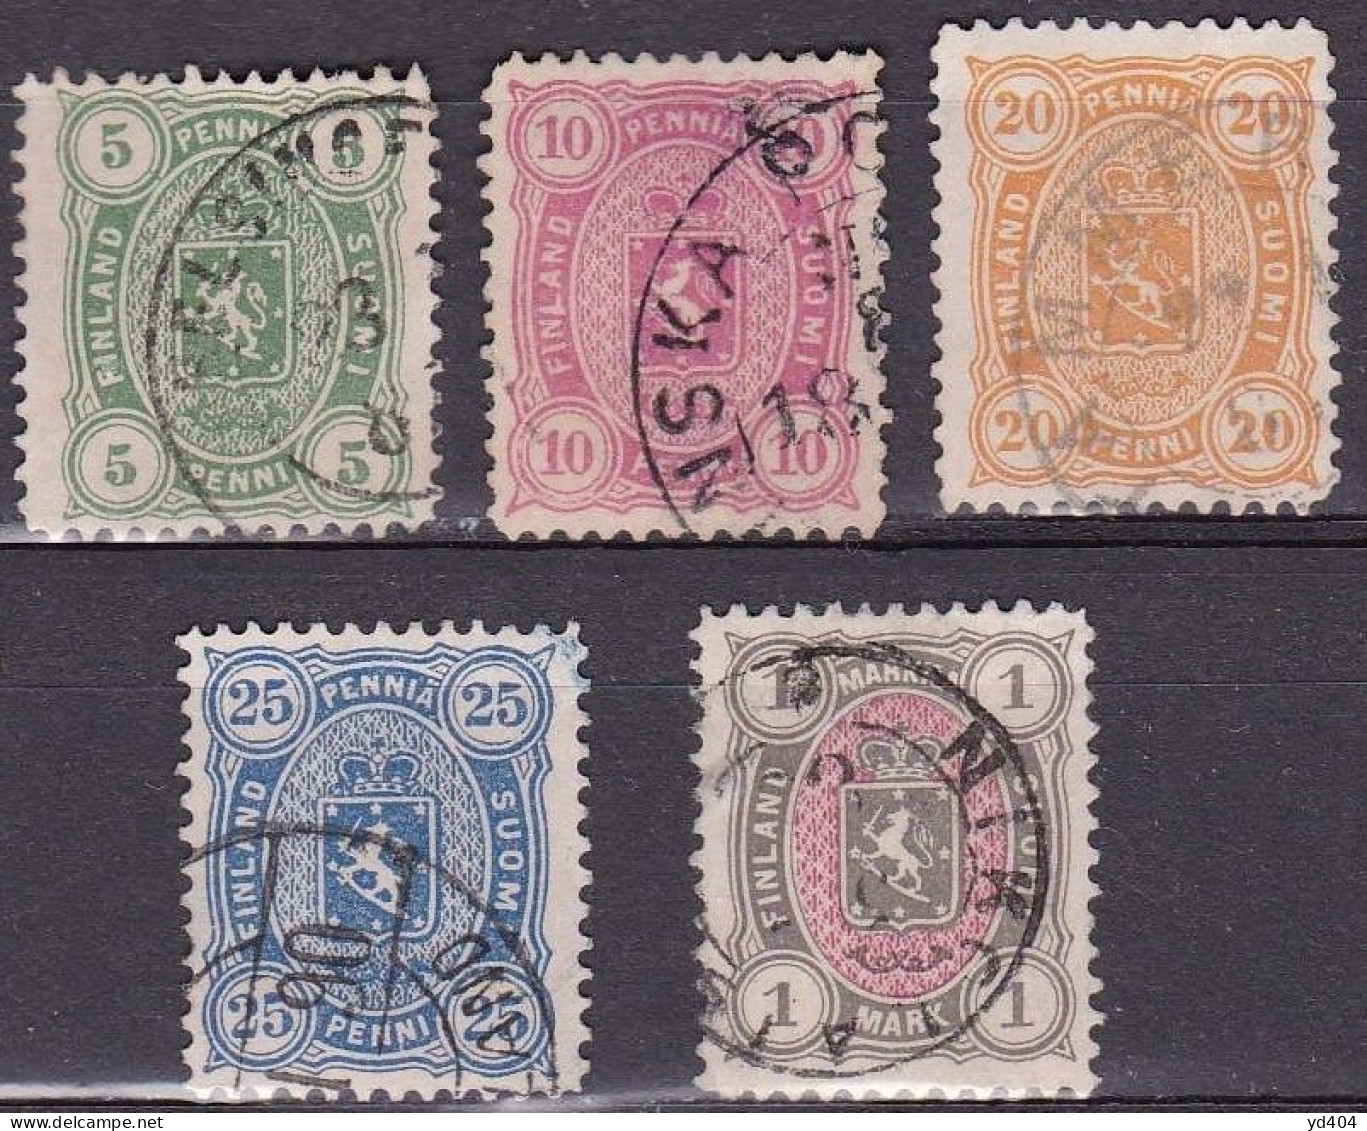 FI010 – FINLANDE – FINLAND – 1885 – COAT OF ARMS SET - SG 97-105 USED 43 € - Used Stamps